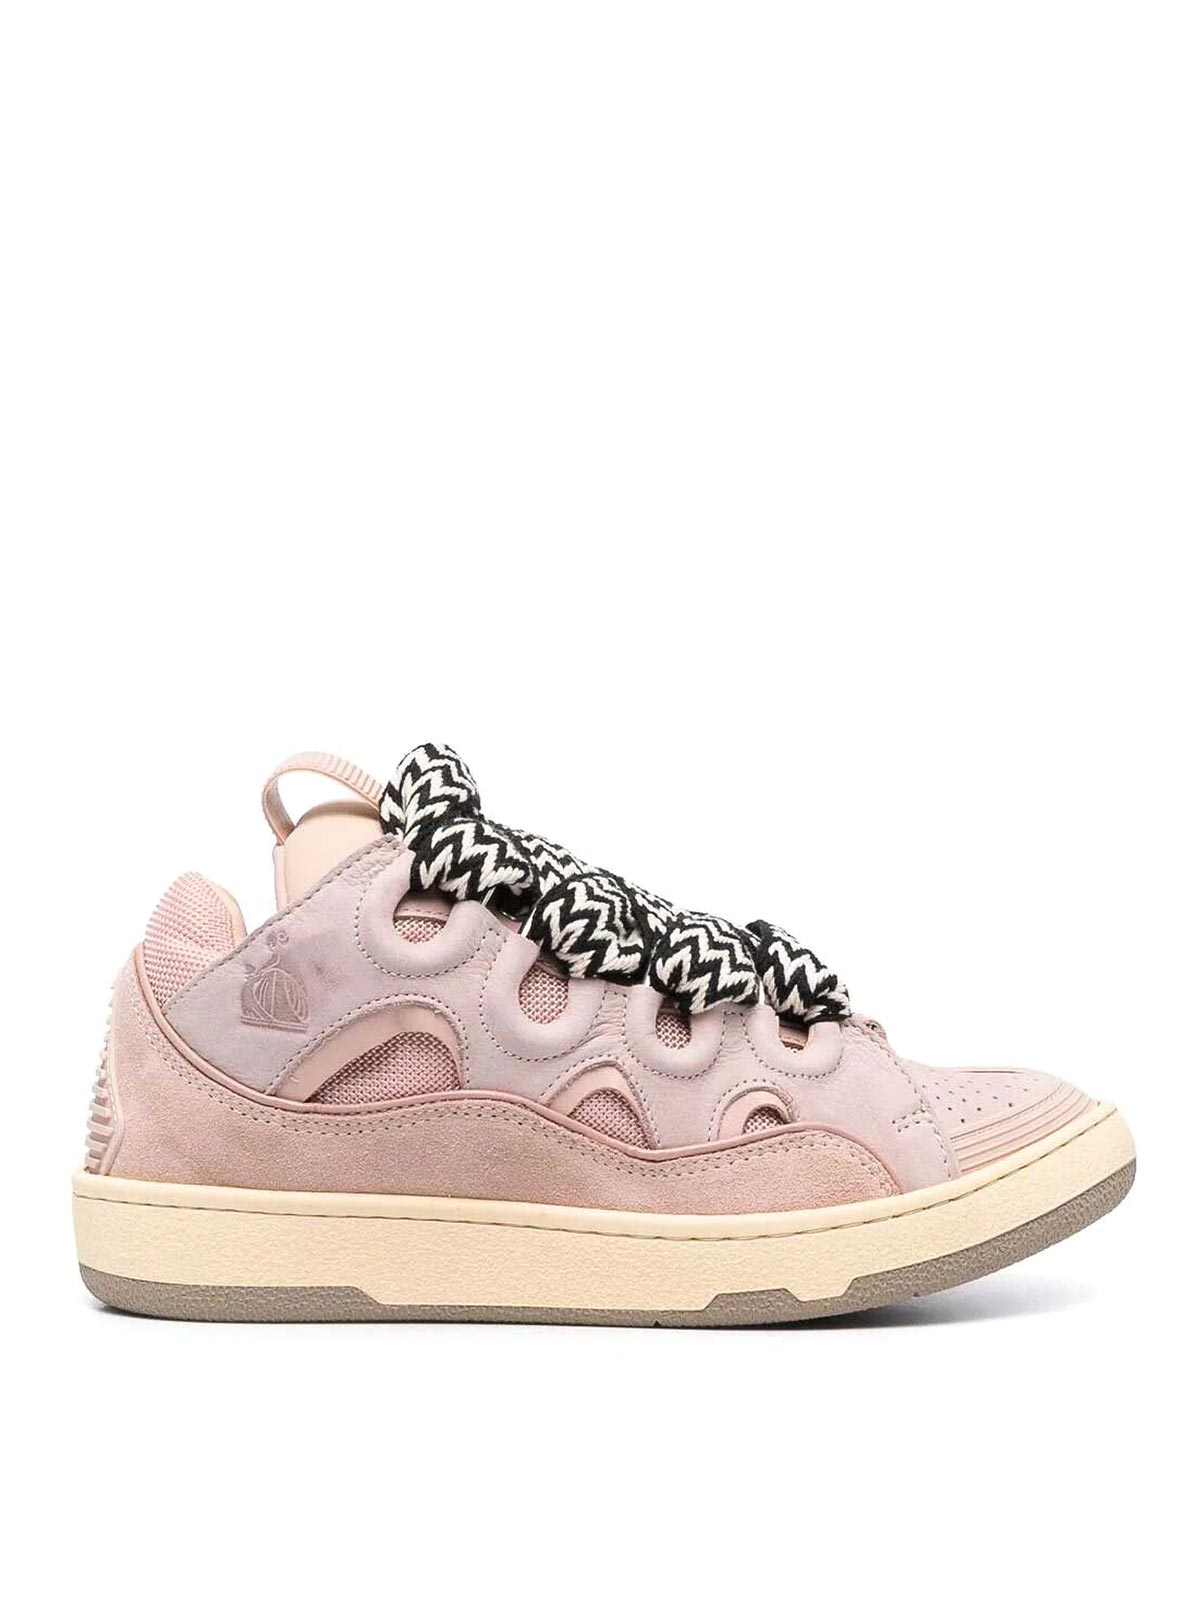 Lanvin Curb Light Sneakers In Nude & Neutrals